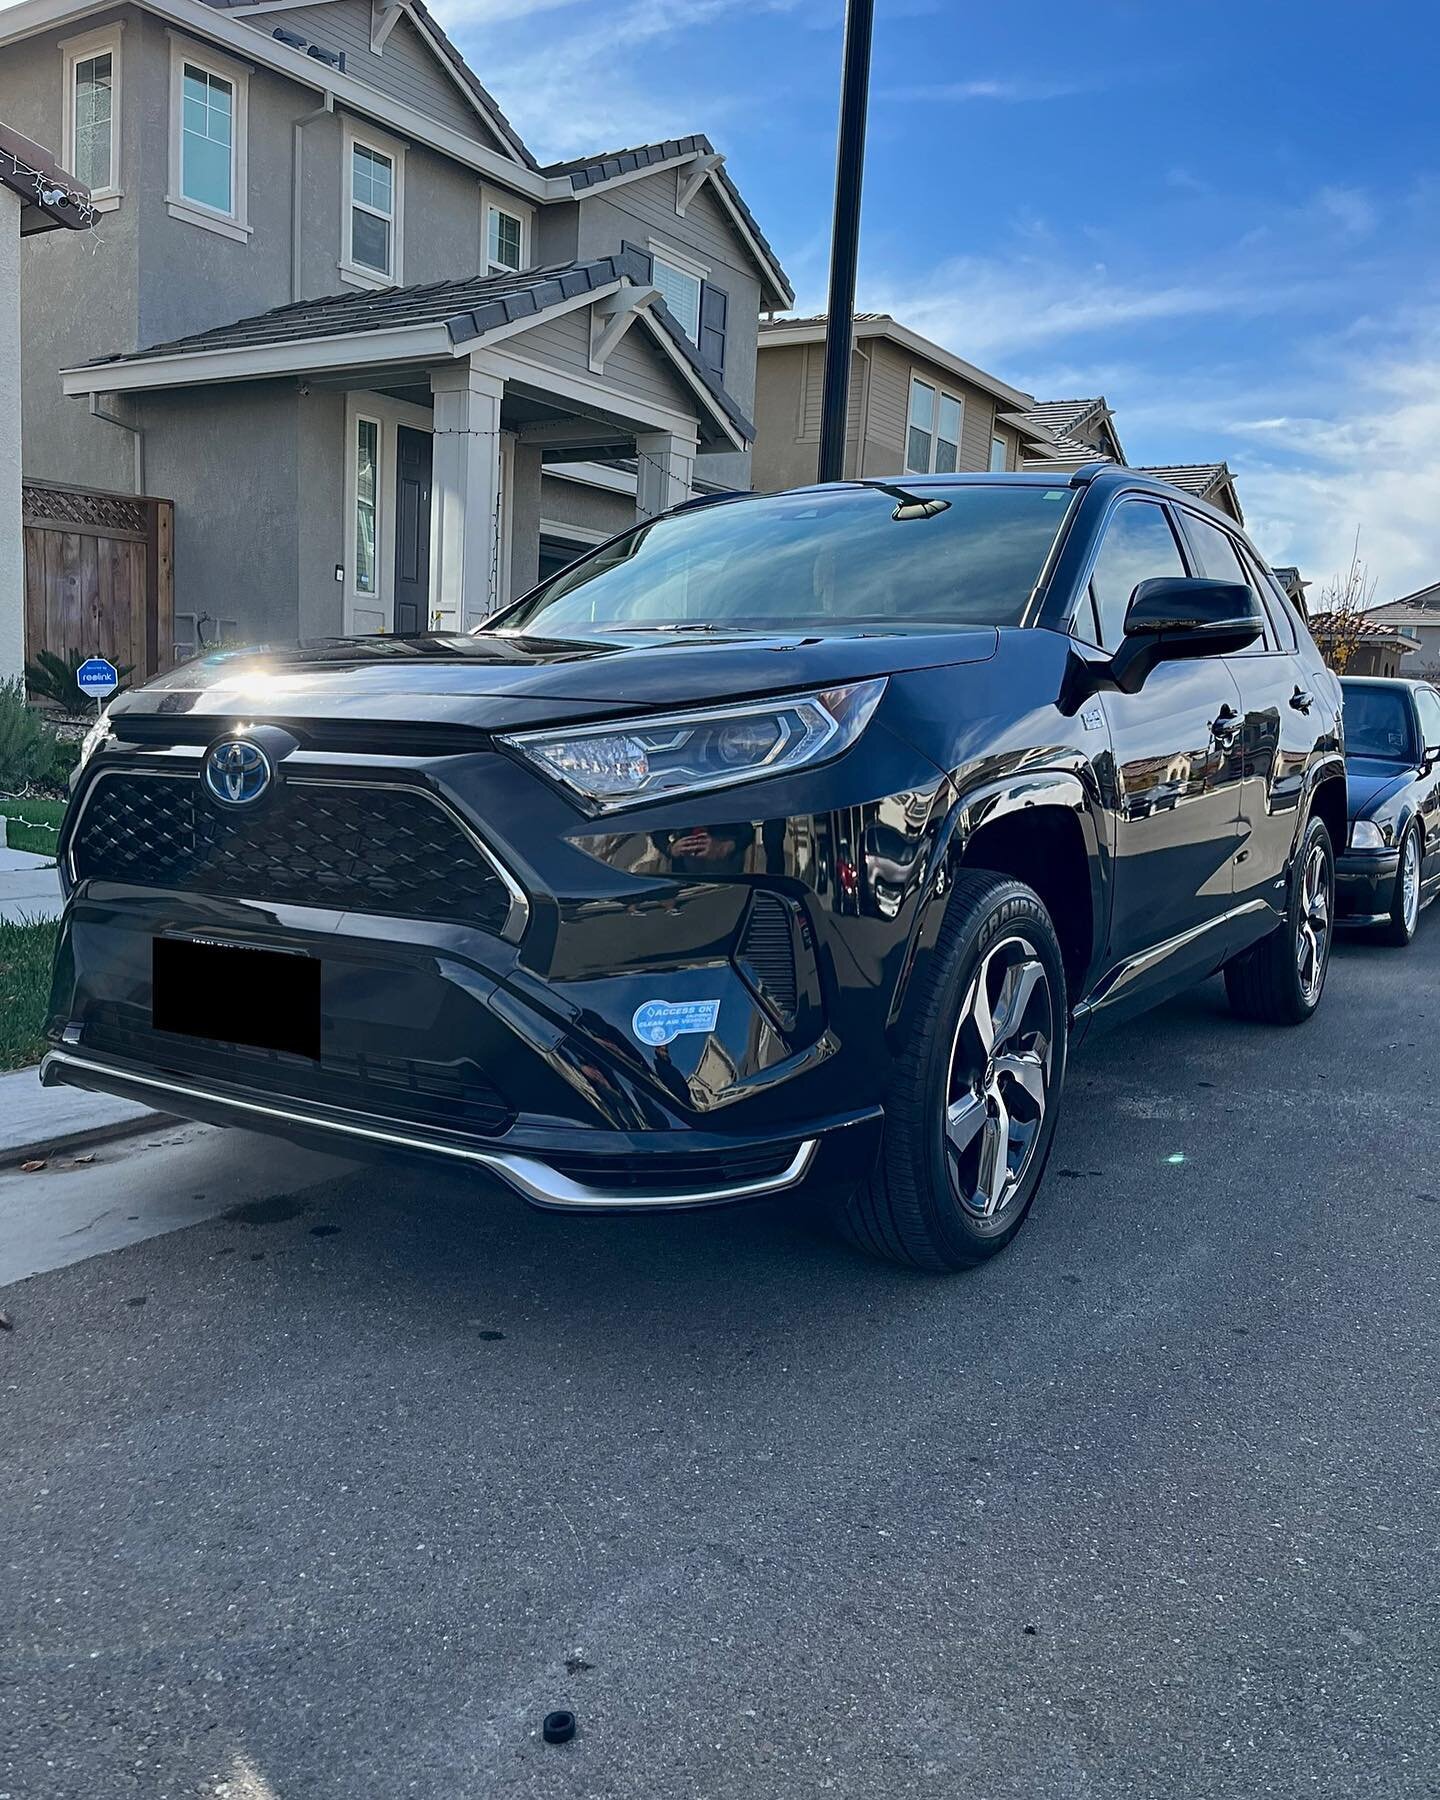 Toyota RAV4 in for an exterior Signature Diamond Package &amp; scratch removal! This car had an impact with some road cones, so we corrected as much as we could &amp; evened the paint with a full polish. Results came out amazing!&thinsp;
&thinsp;&thi